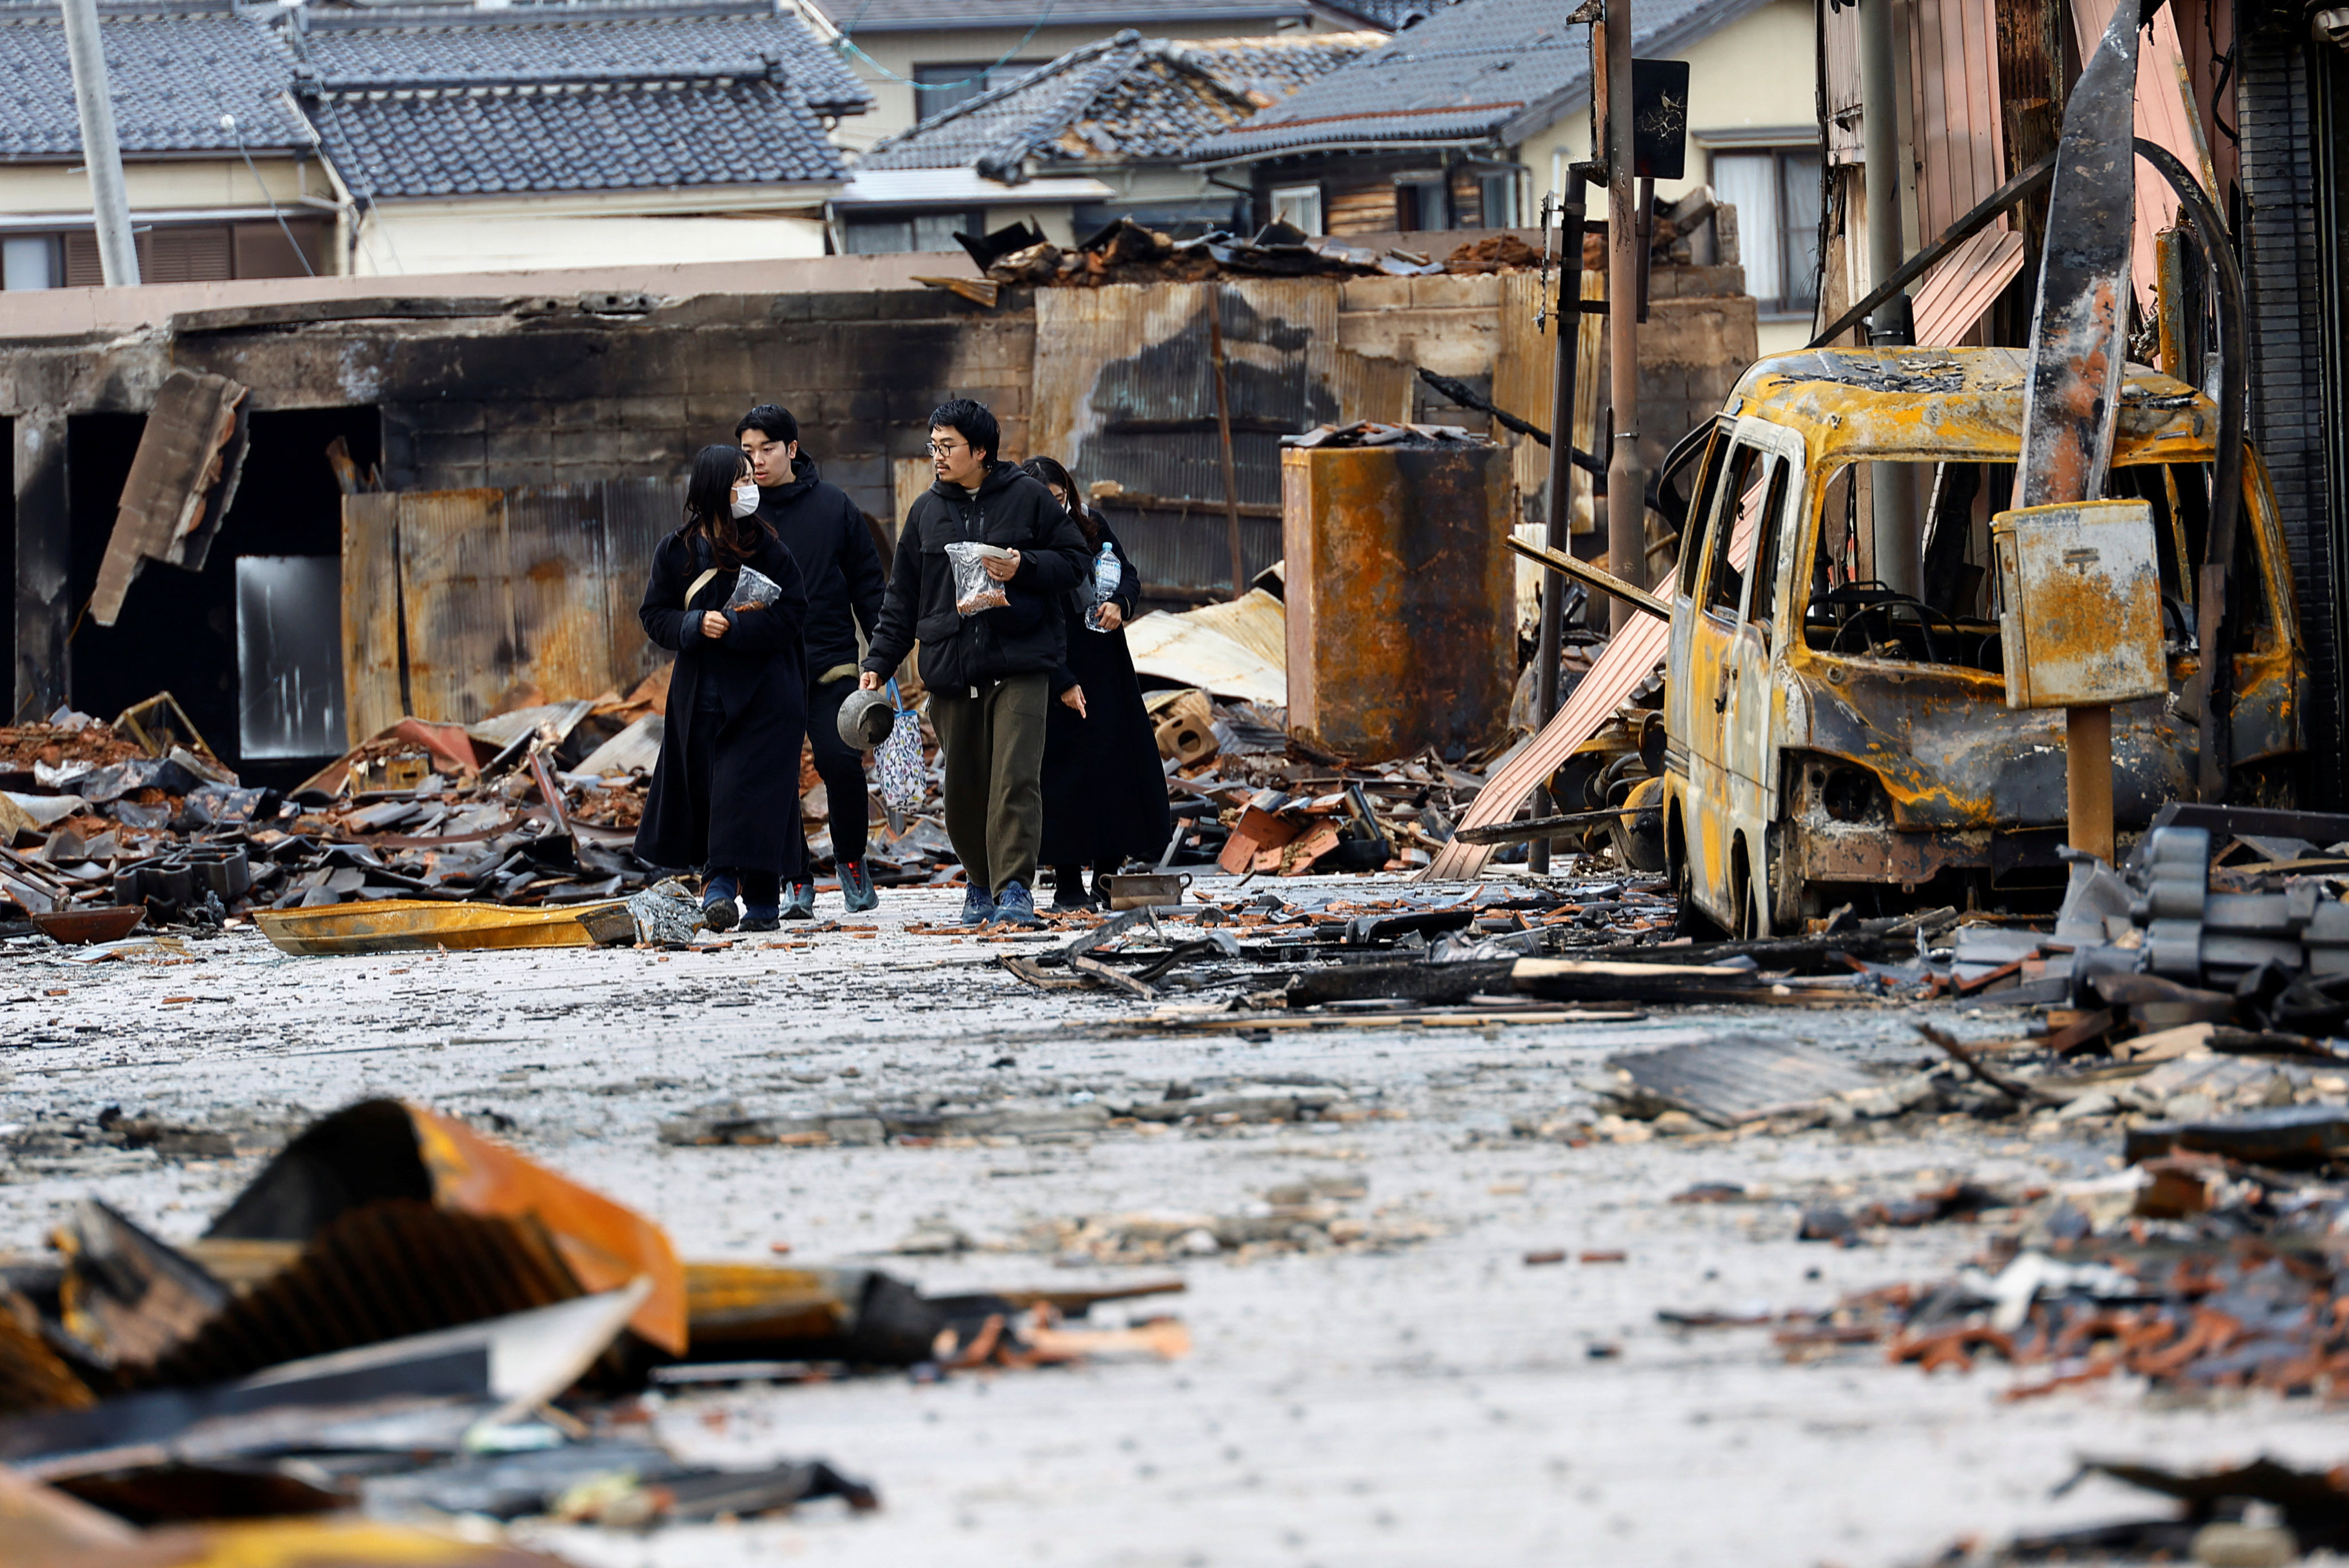 Japanese lacquer artist Kohei Kirimoto searches for his missing cats with family members, near to an “Asaichi” morning market which burnt down in a quake-triggered fire, in Wajima, Japan, on Thursday. Photo: Reuters